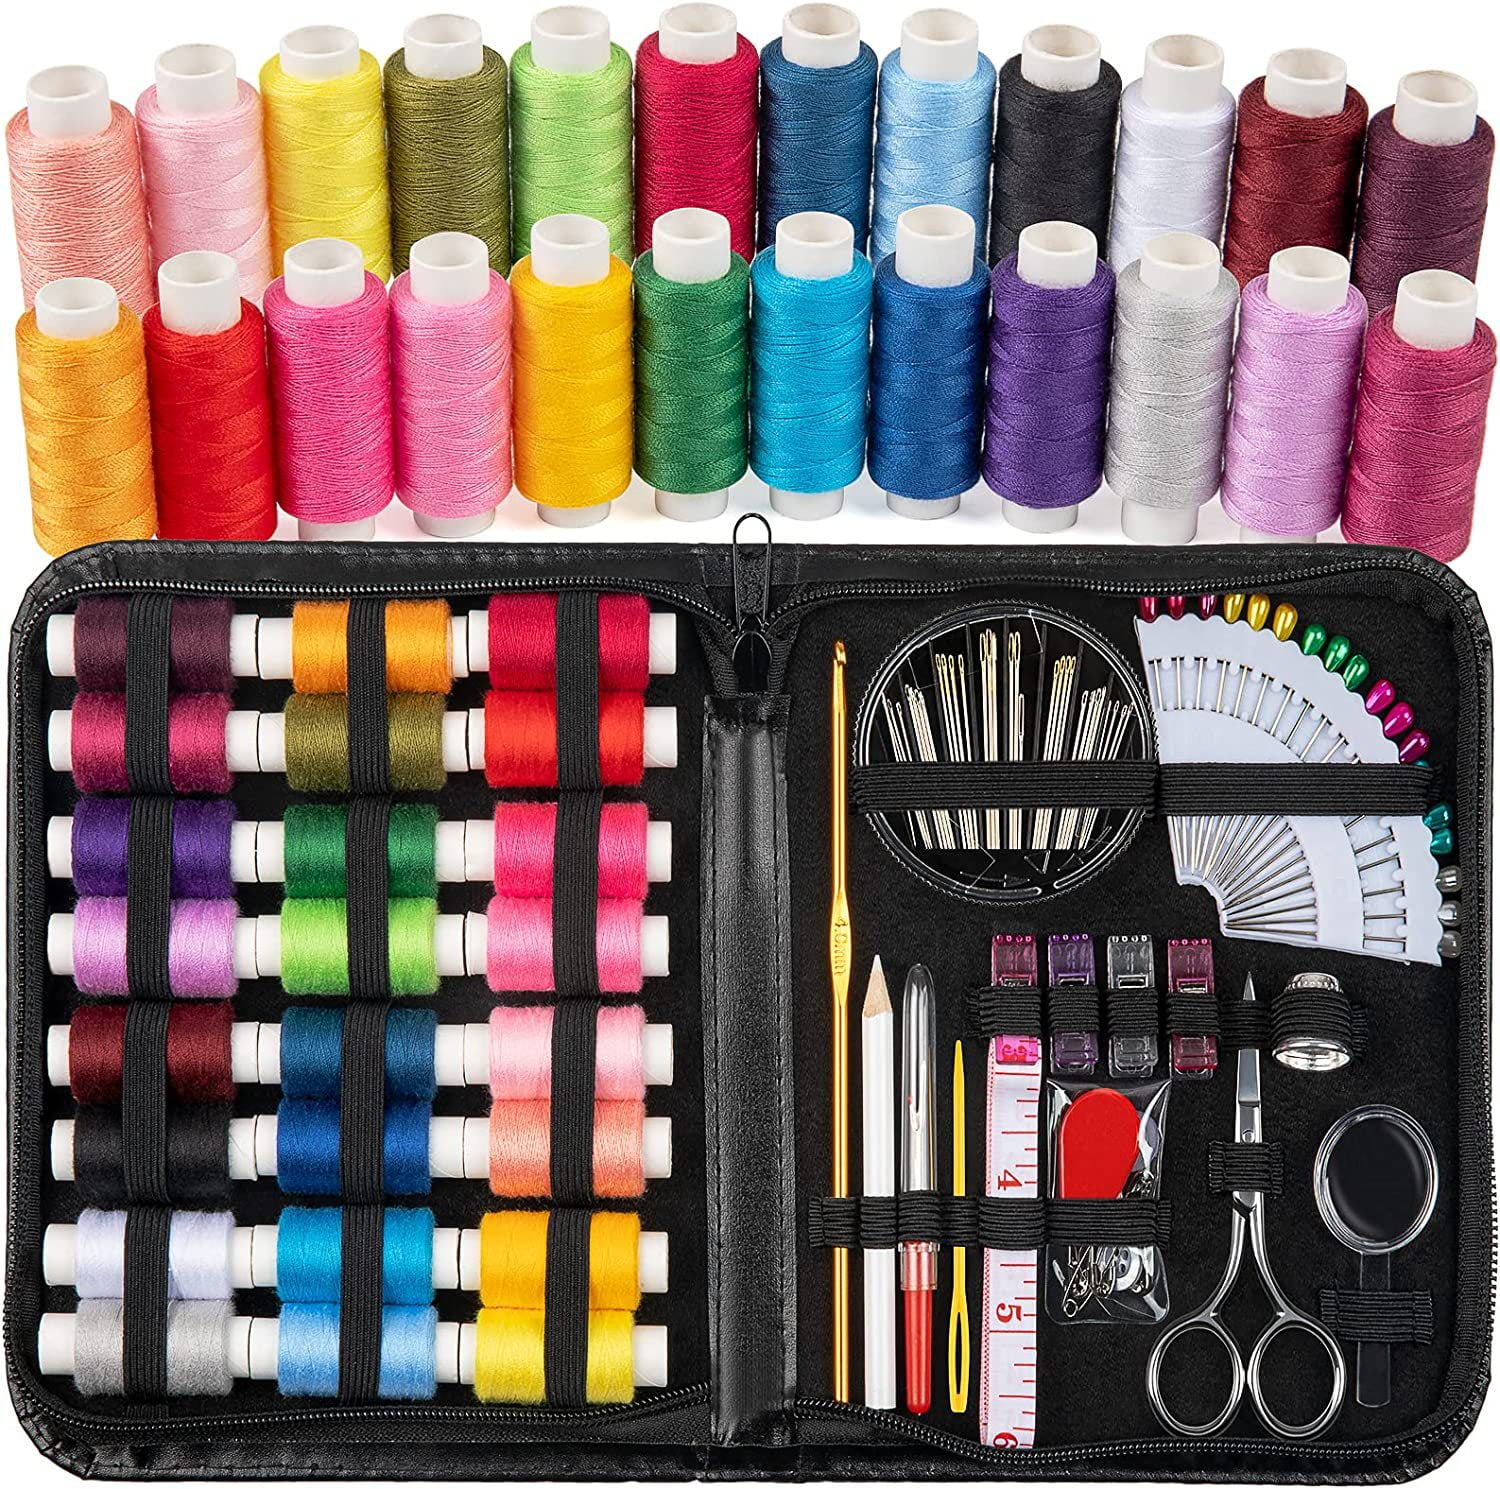 DLM Embroidery Materials Starter Kit Tutorial DIY Set Sewing Color Thread  Kits Hand Sewing Needle Price in India - Buy DLM Embroidery Materials  Starter Kit Tutorial DIY Set Sewing Color Thread Kits